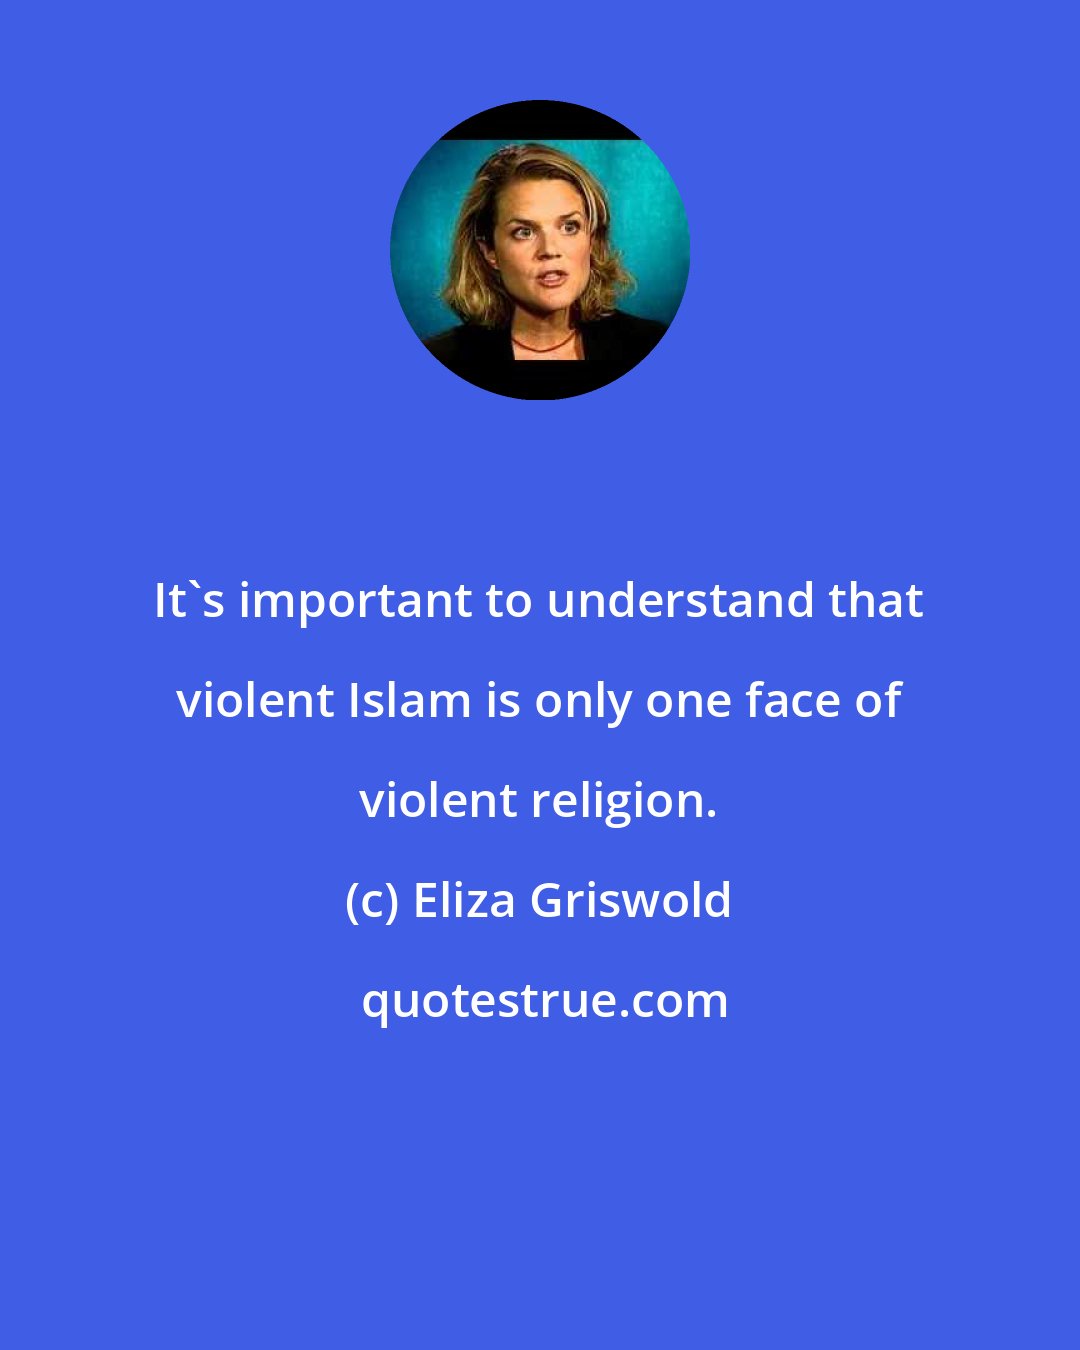 Eliza Griswold: It's important to understand that violent Islam is only one face of violent religion.